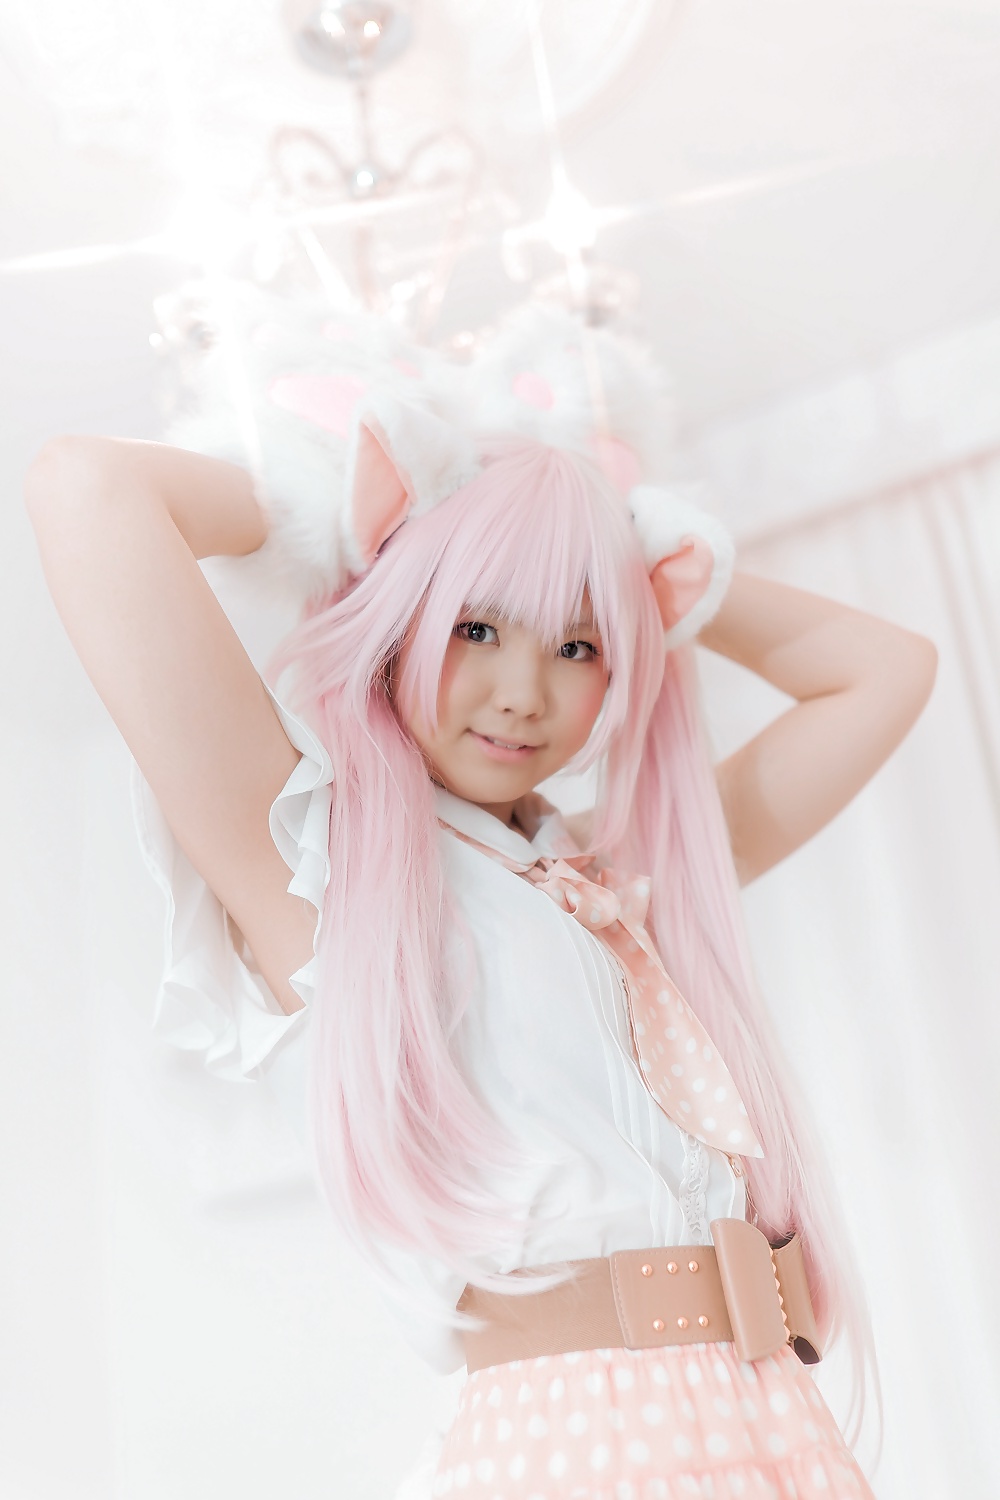 Asiatica cosplay in bianco
 #26559010